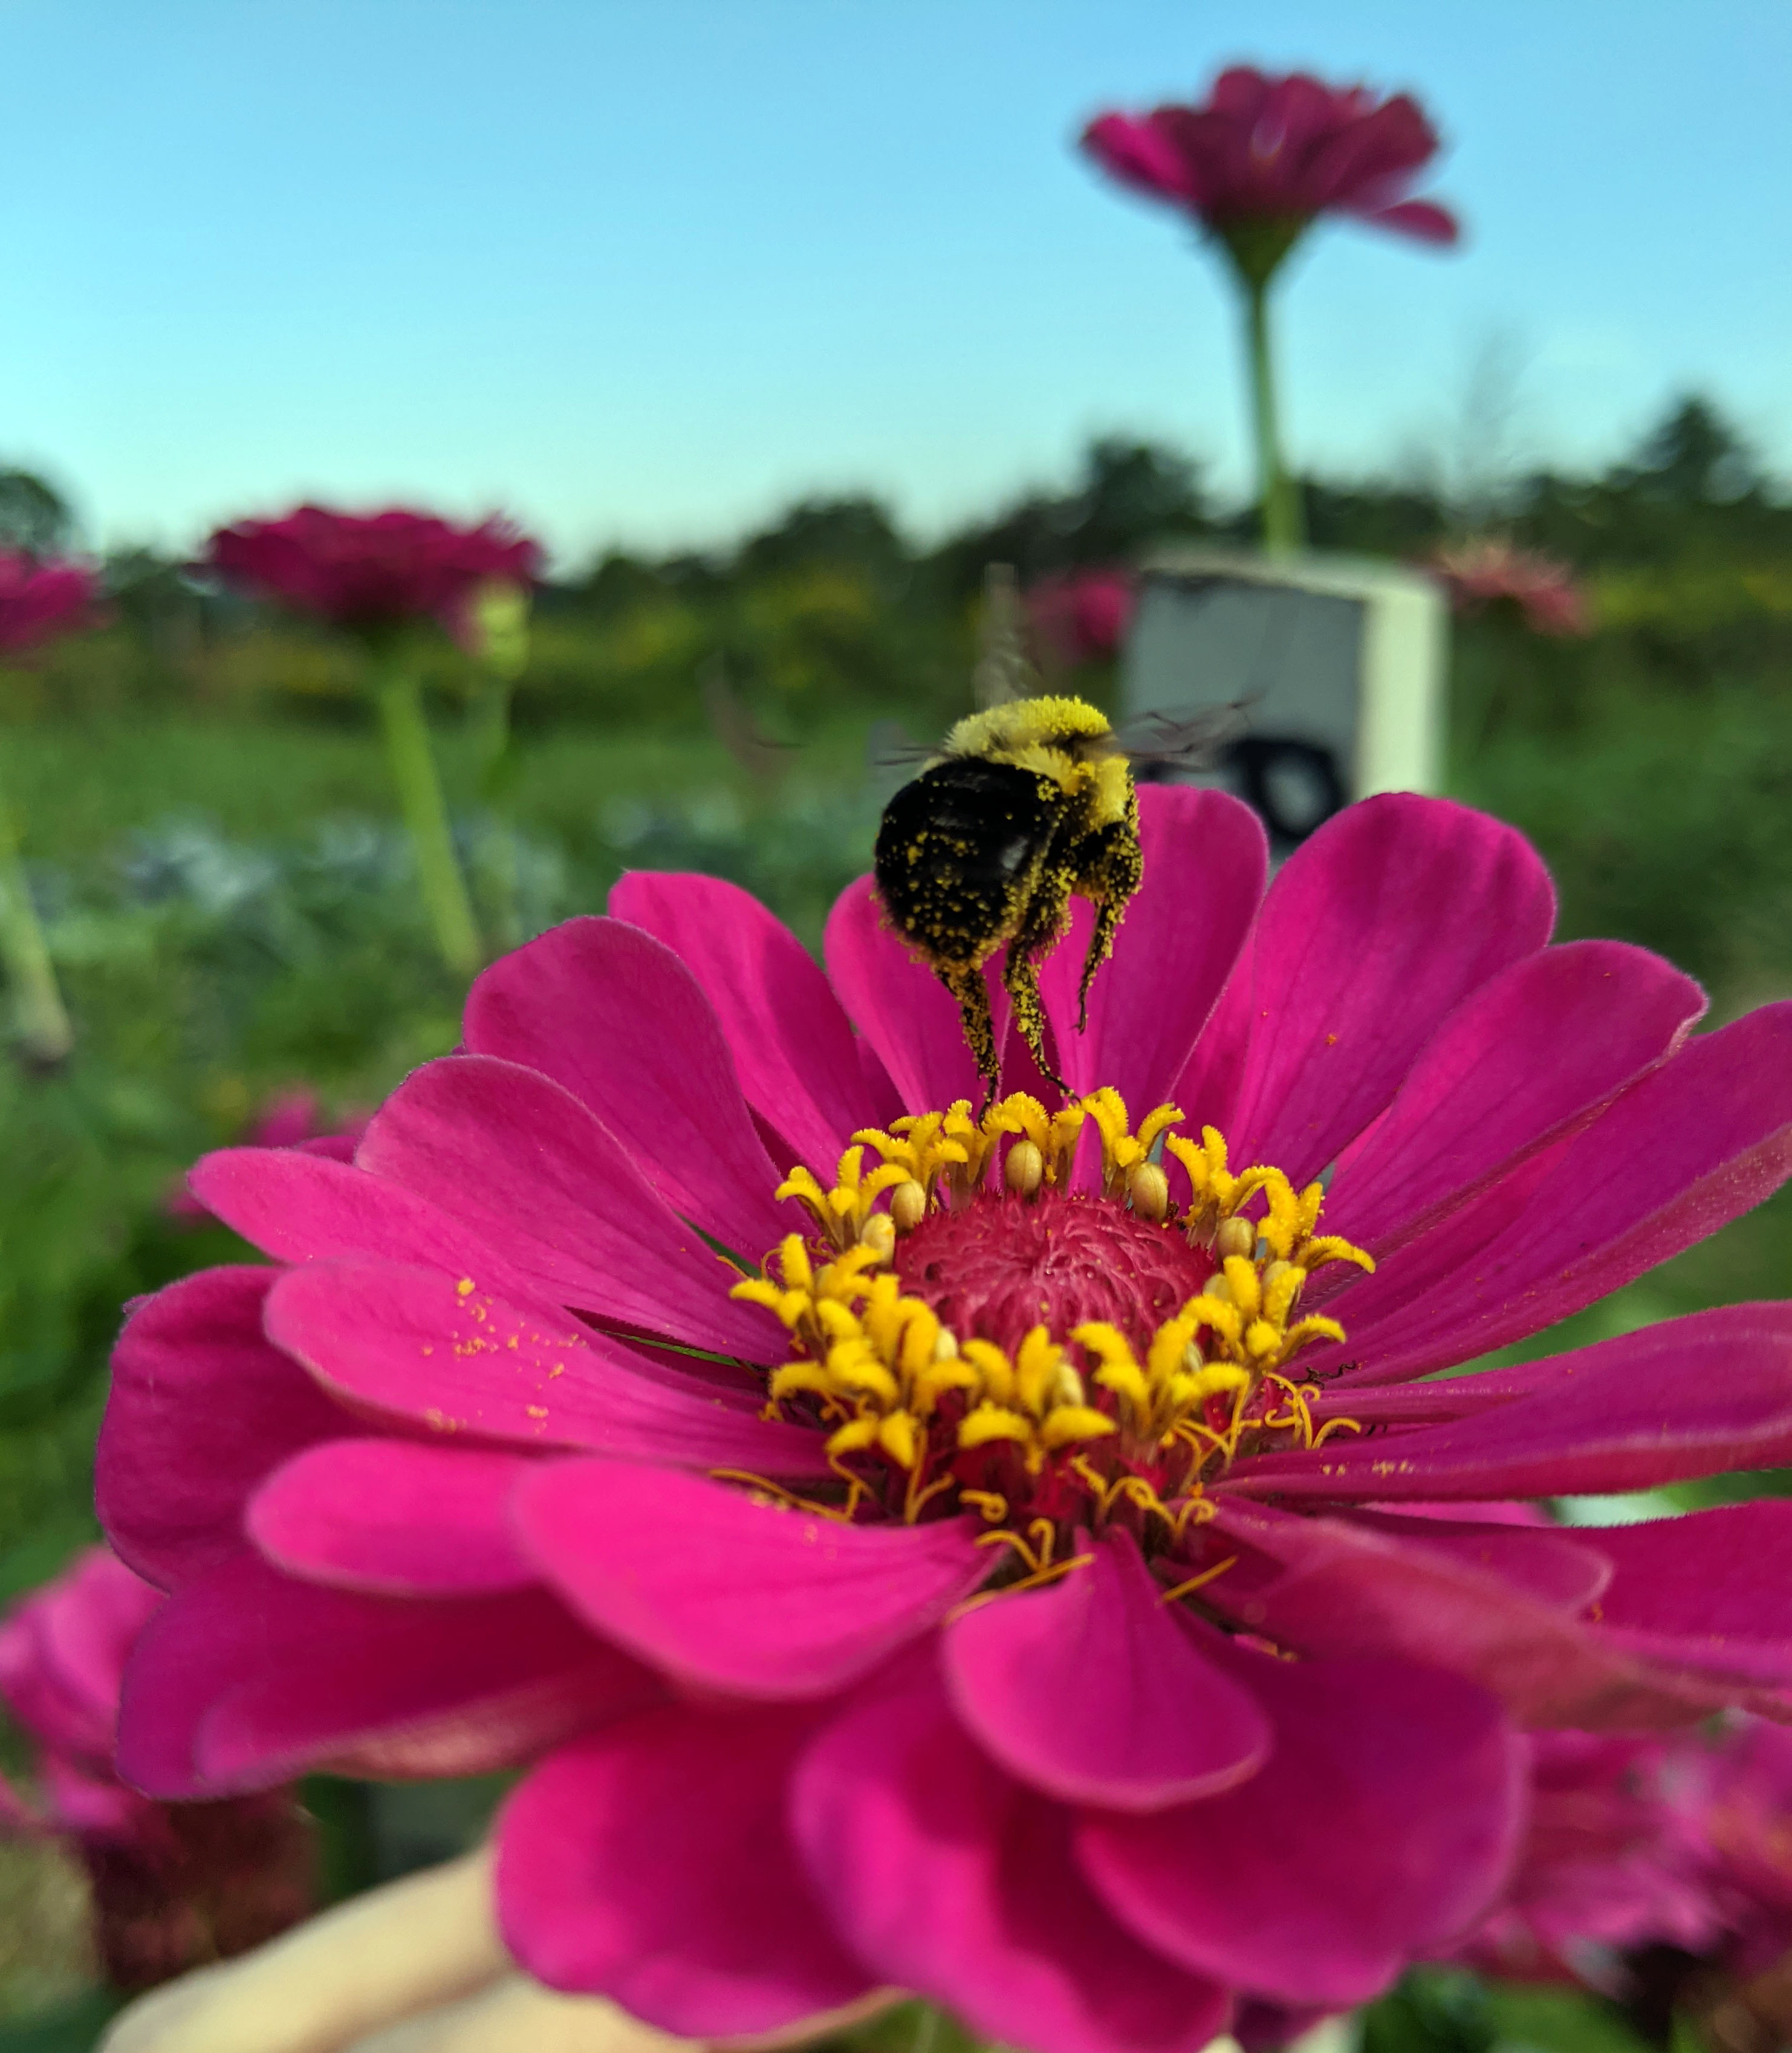 A bumble pee on a pink flower